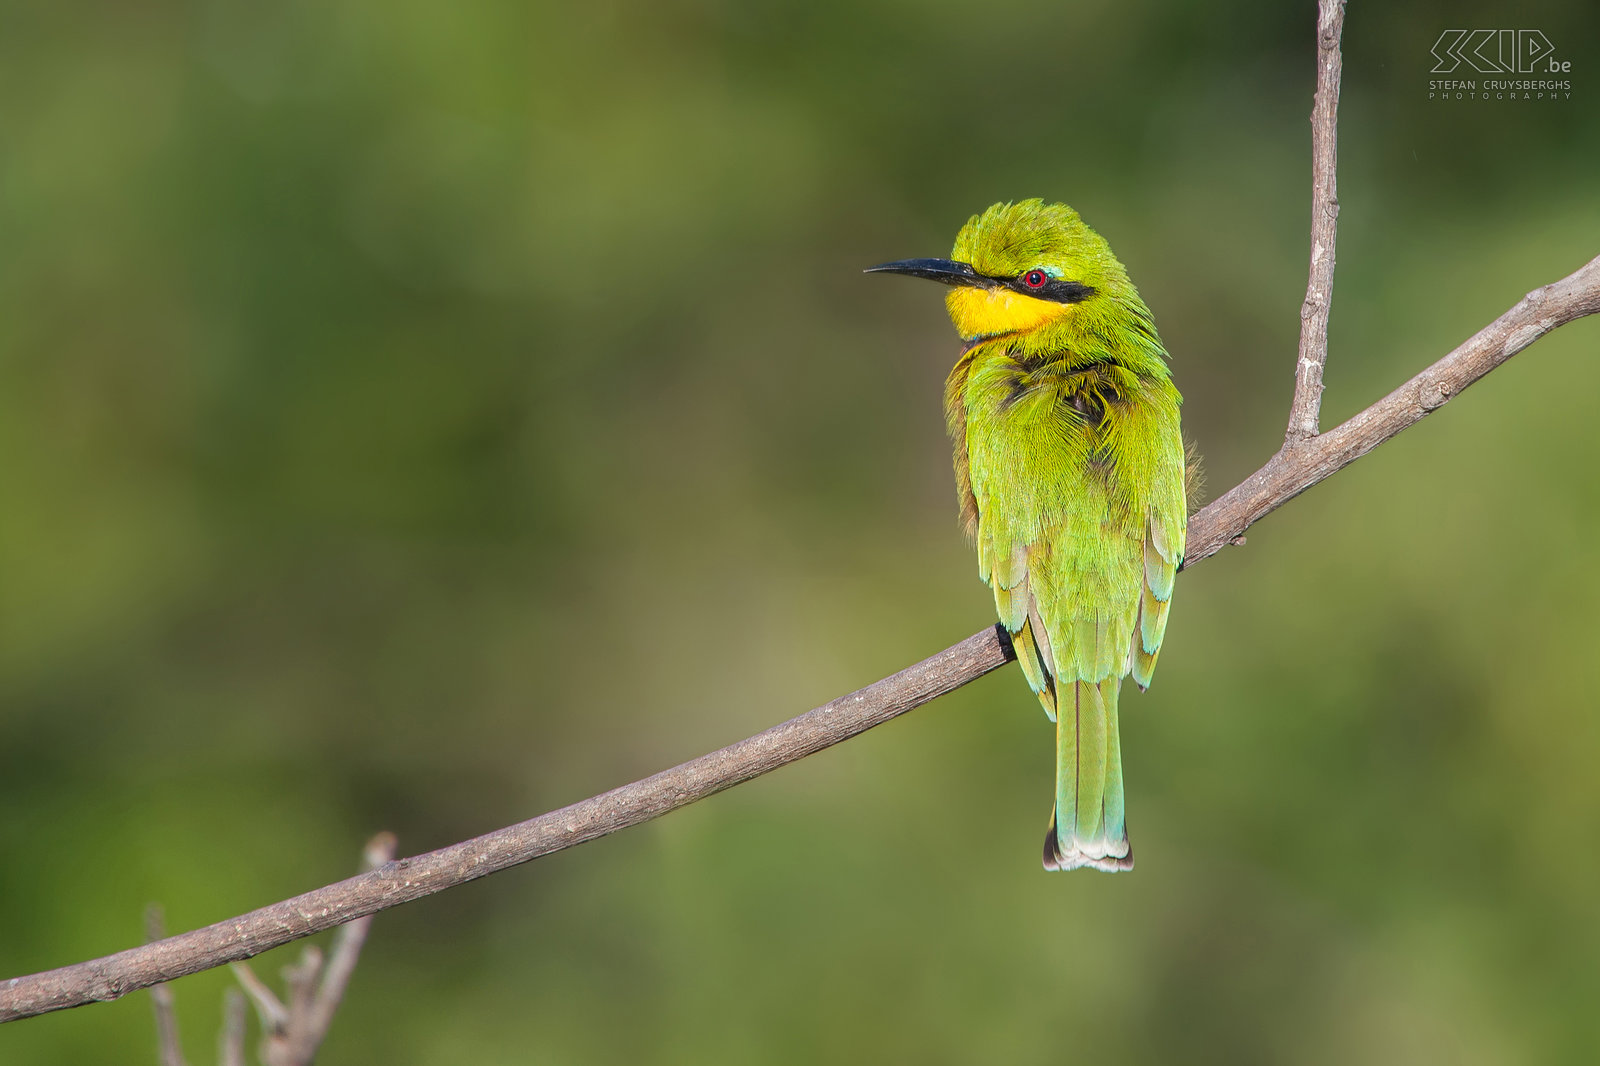 South Luangwa - Little bee-eater The little bee-eater (Merops pusillus) is the smallest bee-eater, about 16-17cm long. They mainly eat insects, especially bees and hornets and they remove the sting of the bee by repeatedly hitting it against a hard surface. Stefan Cruysberghs